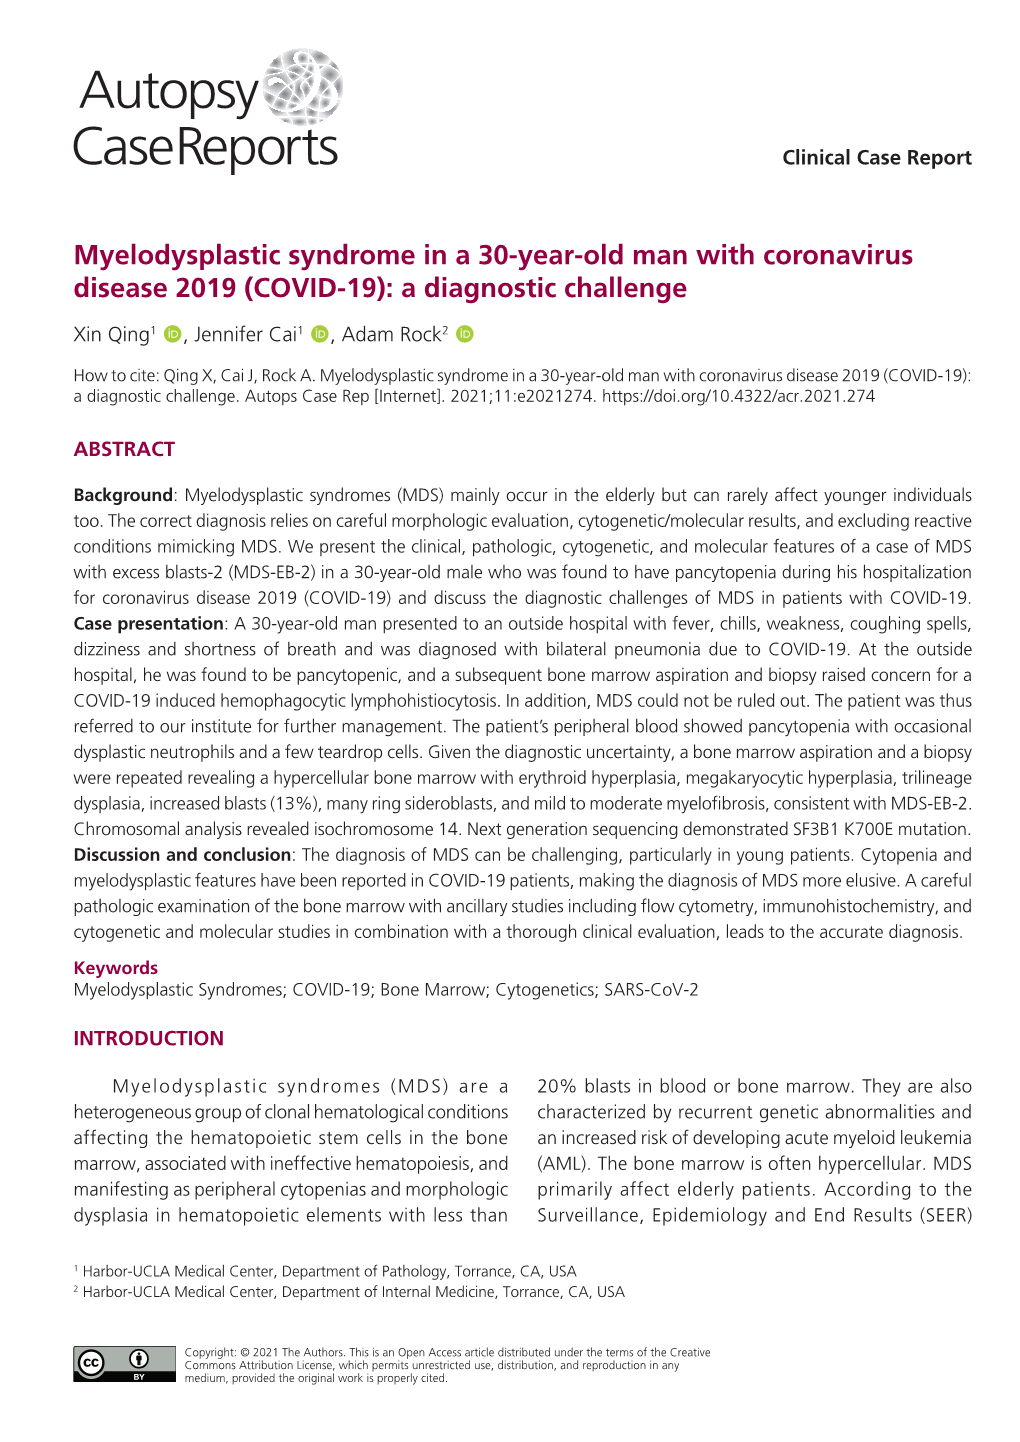 Myelodysplastic Syndrome in a 30-Year-Old Man with Coronavirus Disease 2019 (COVID-19): a Diagnostic Challenge